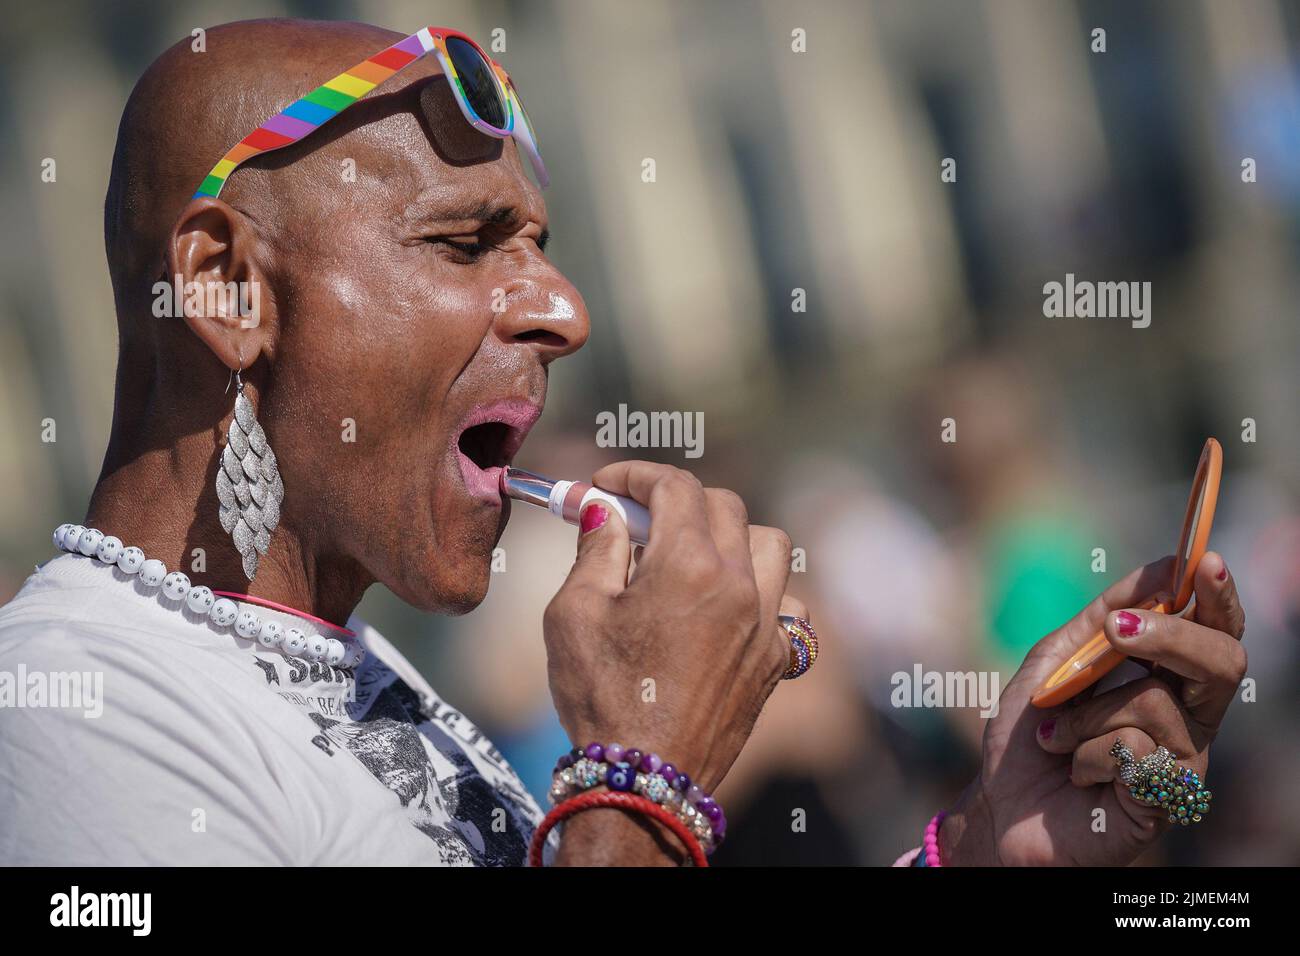 East Sussex, UK. 6th August 2022. Brighton and Hove Pride 2022. Early arrivals for the annual LGBT+ celebration march from Hove Lawns to Preston Park with thousands predicted to attend. Credit: Guy Corbishley/Alamy Live News Stock Photo